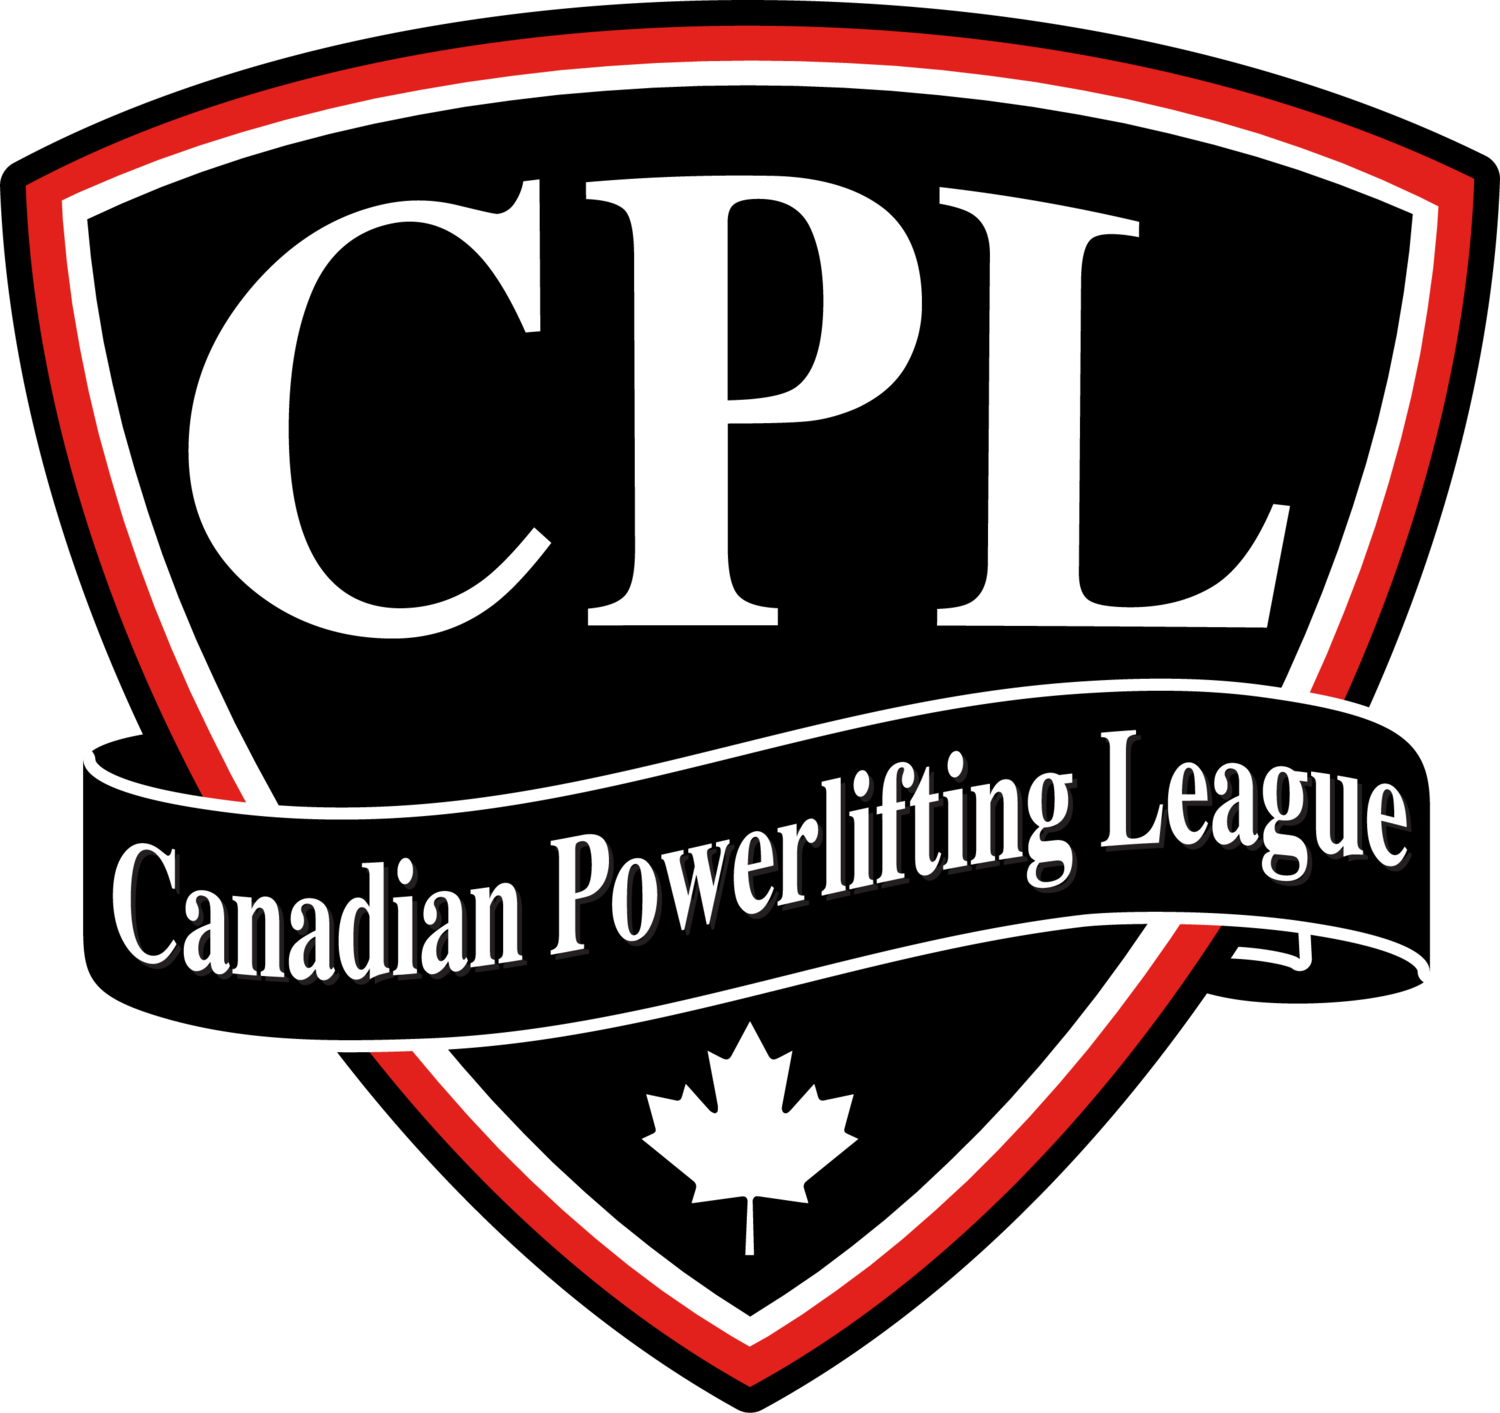 Canadian Powerlifting League